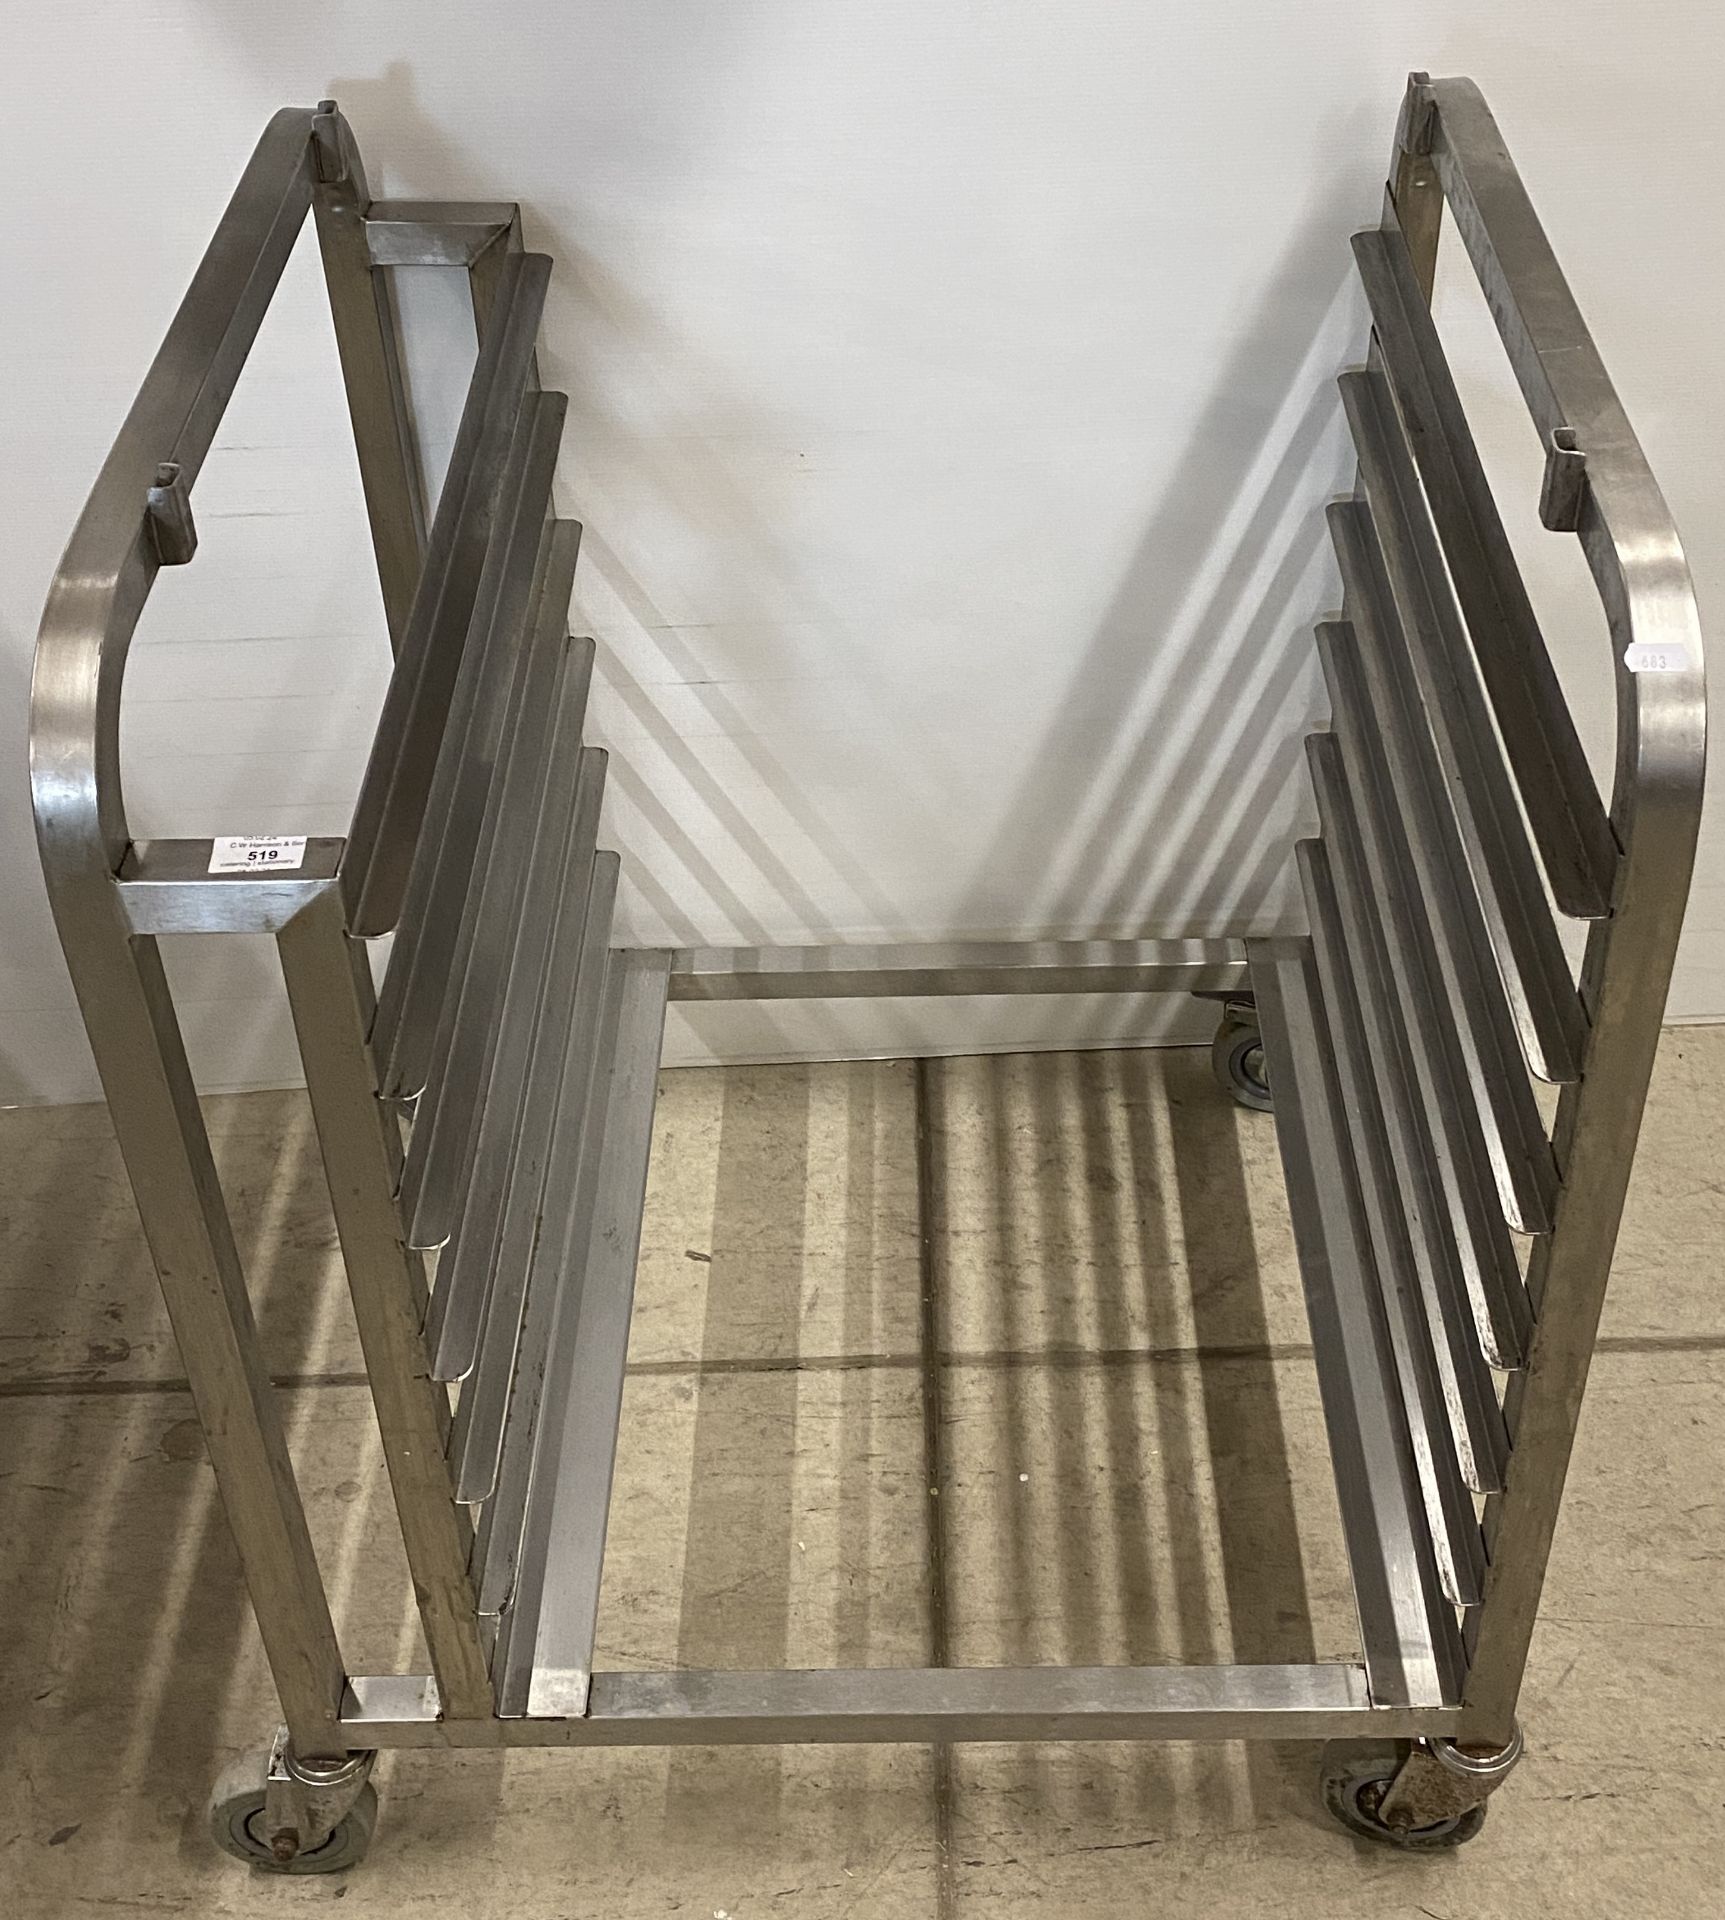 6 x Light mobile tray holders in stainless steel,